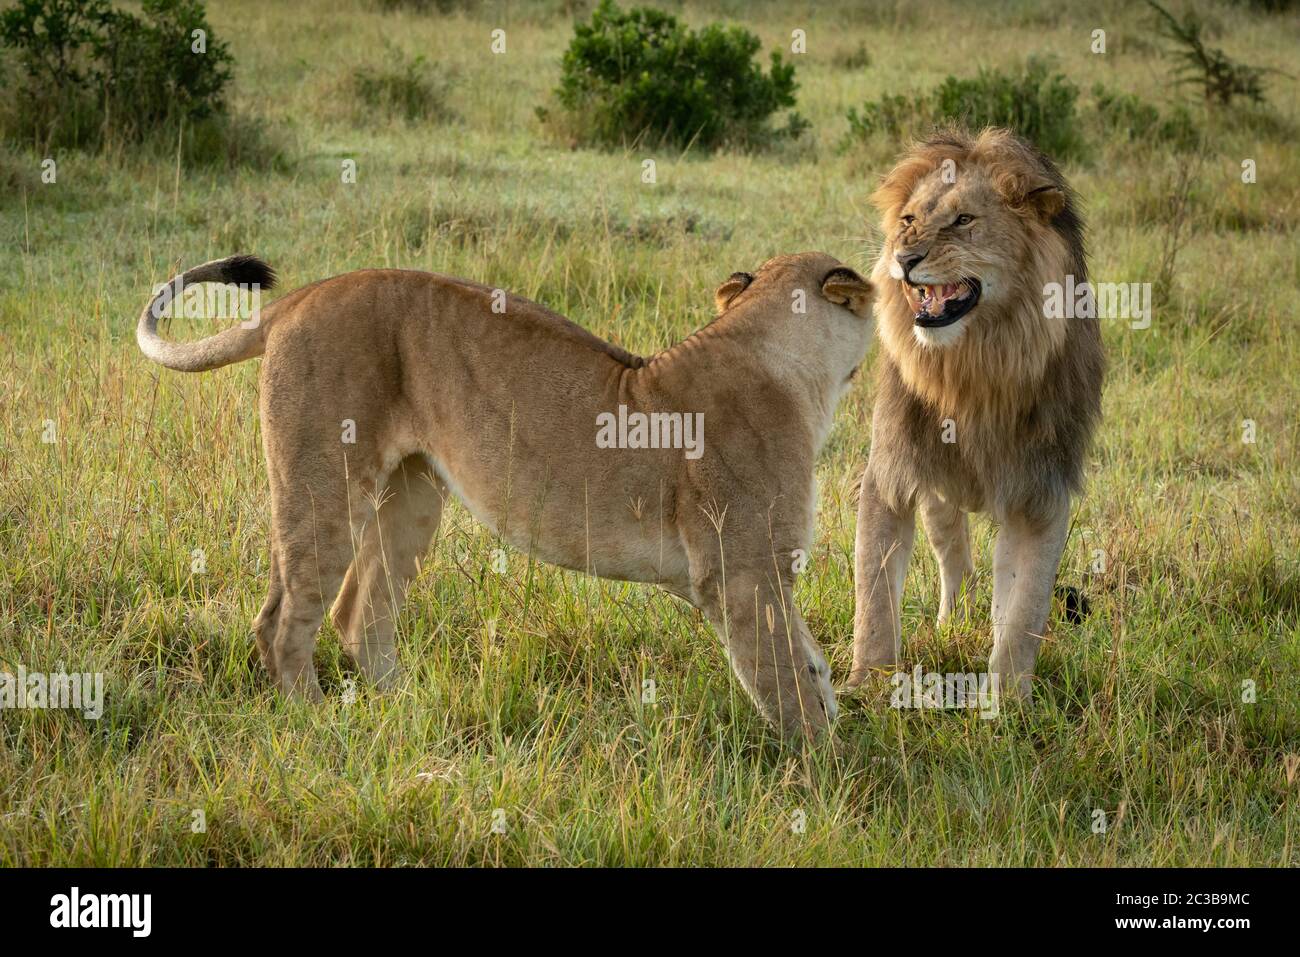 Lion stands growling at lioness in grass Stock Photo